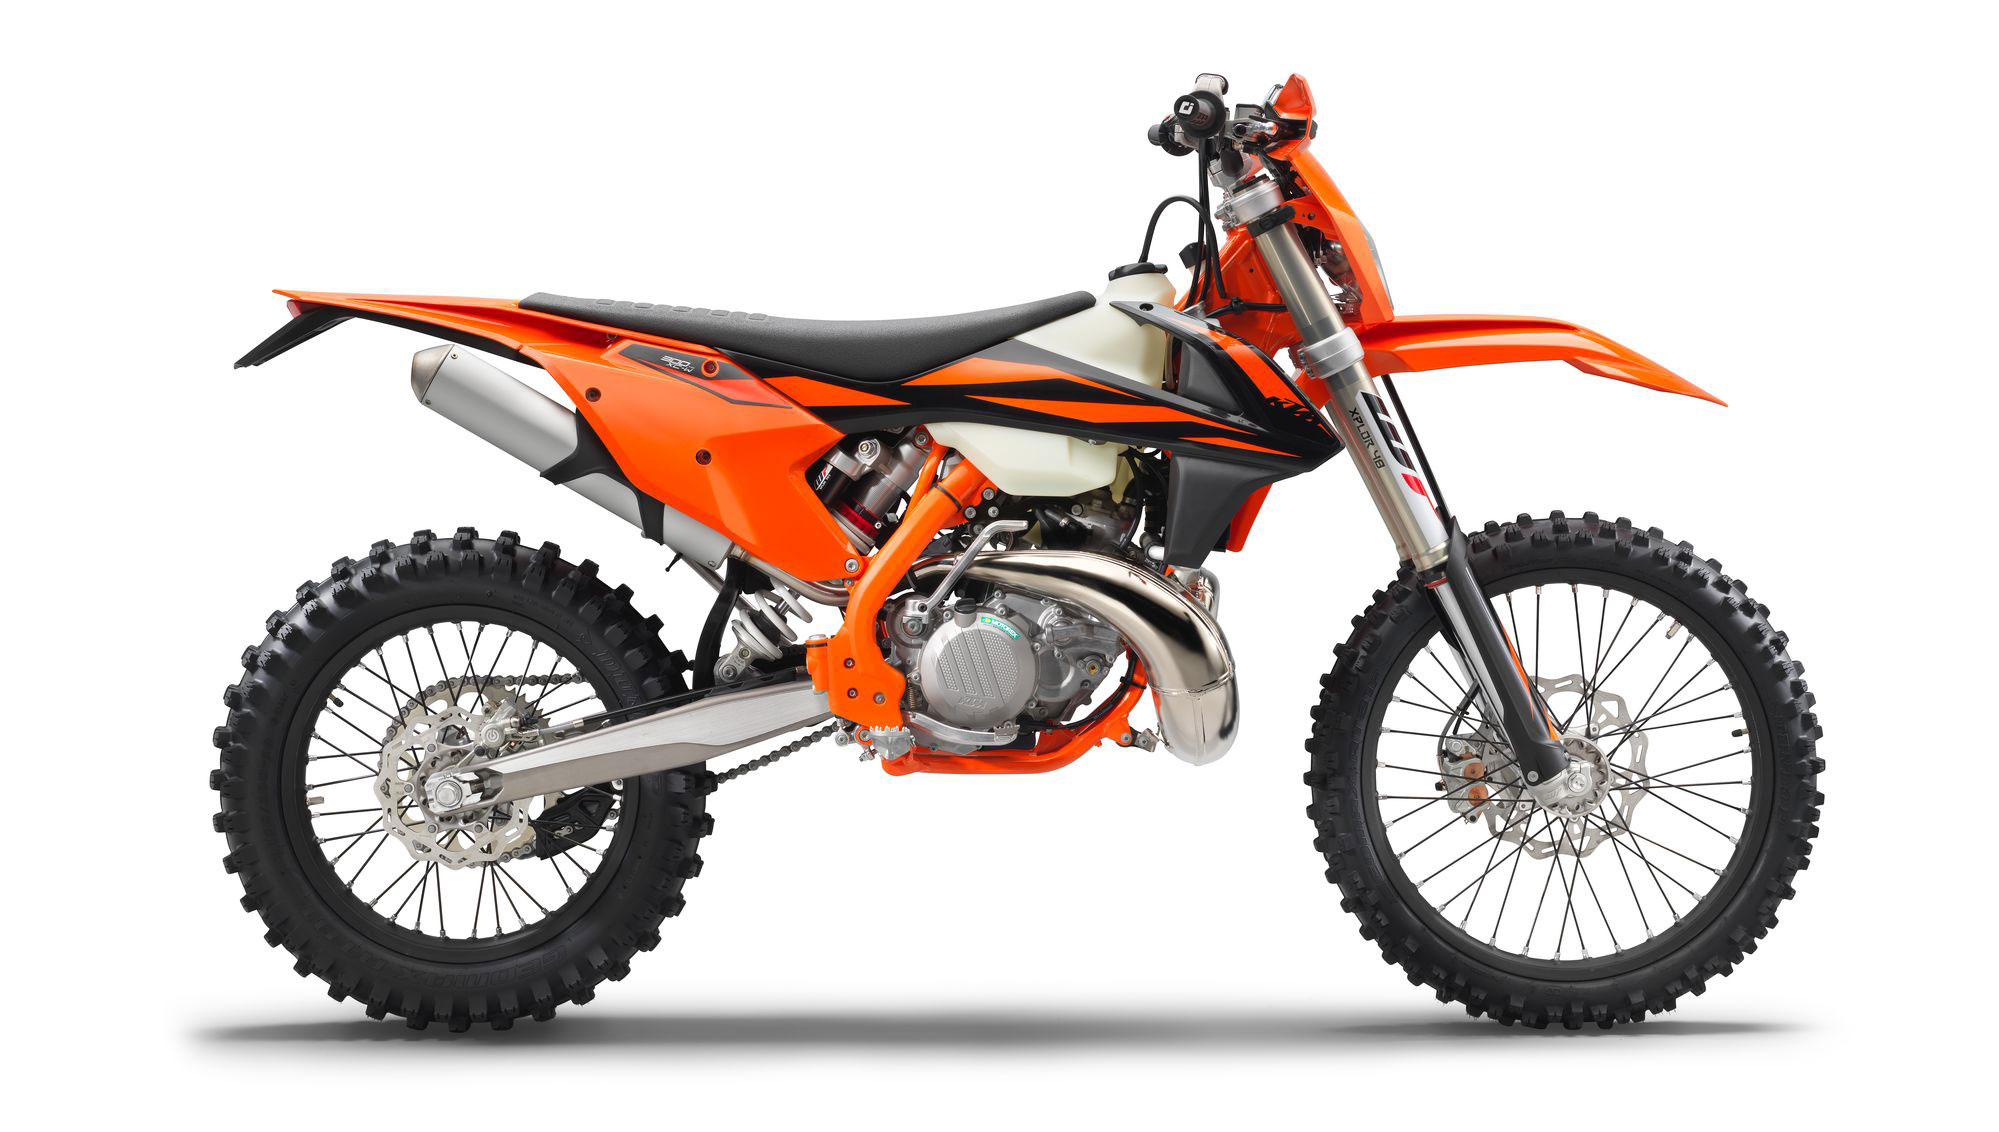 2021 Ktm 300 Xc-W Tpi For Sale in Upper Darby, PA - Cycle 